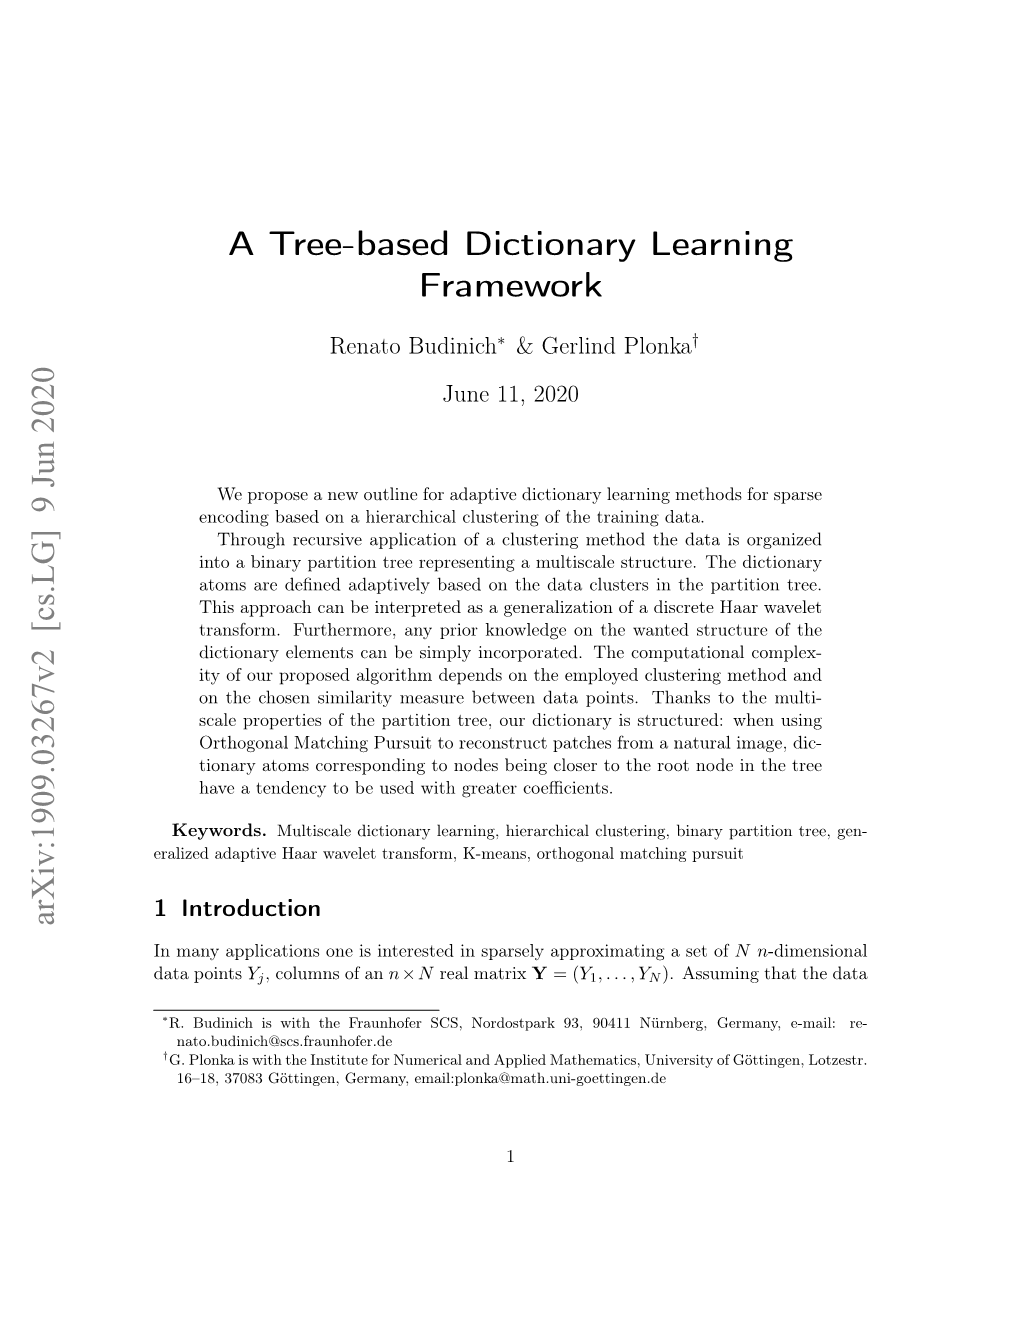 A Tree-Based Dictionary Learning Framework